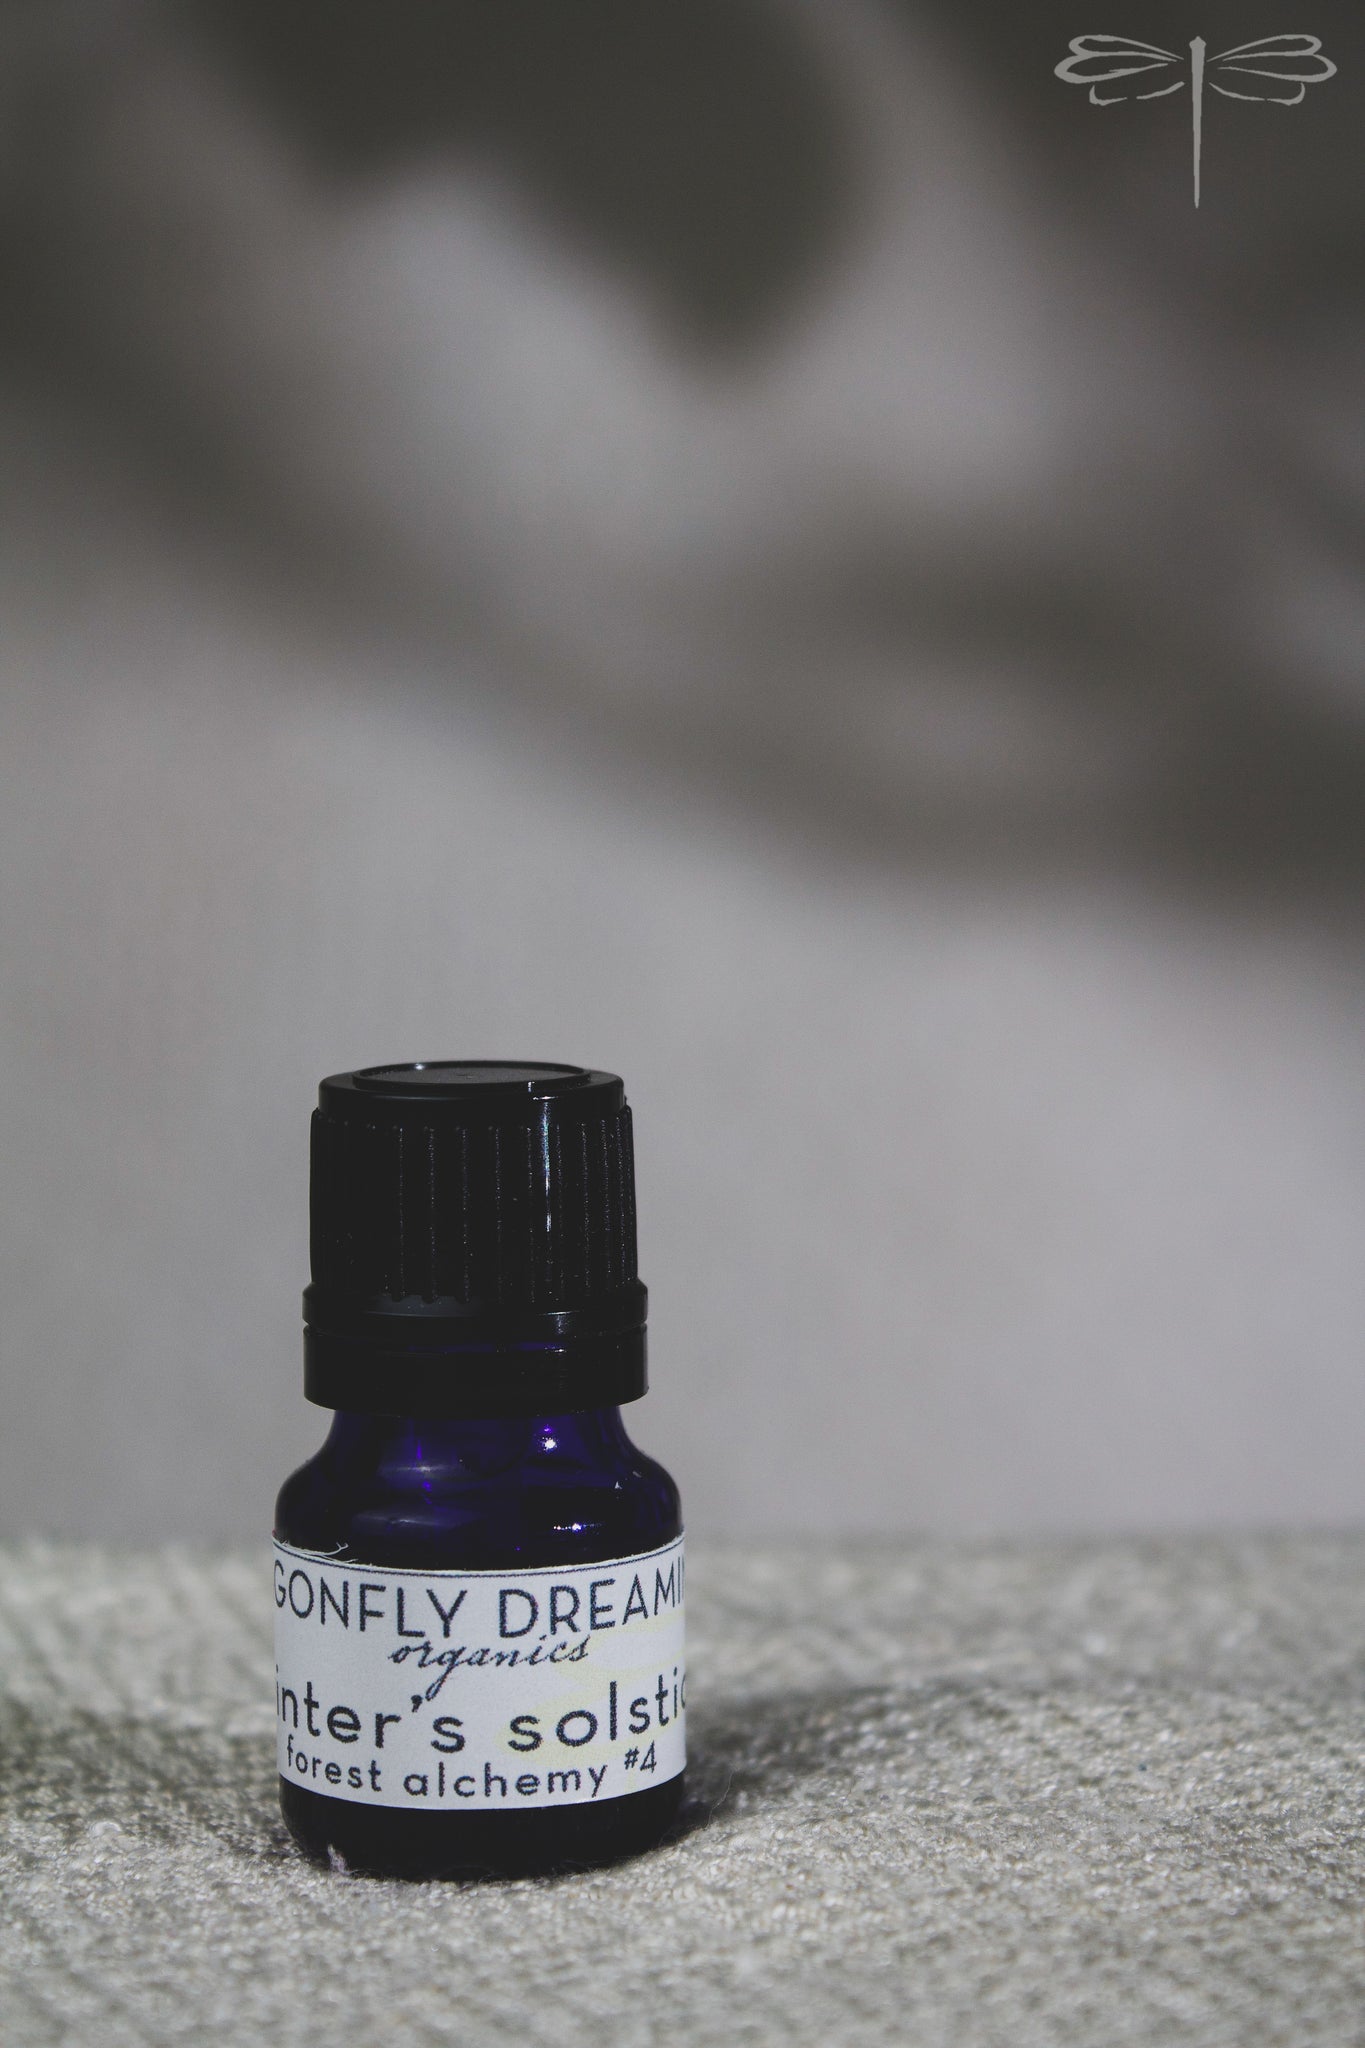 Pictured here, Forest Alchemy #4 Winter's Solstice Essential Oil Blend by Dragonfly Dreaming Organics